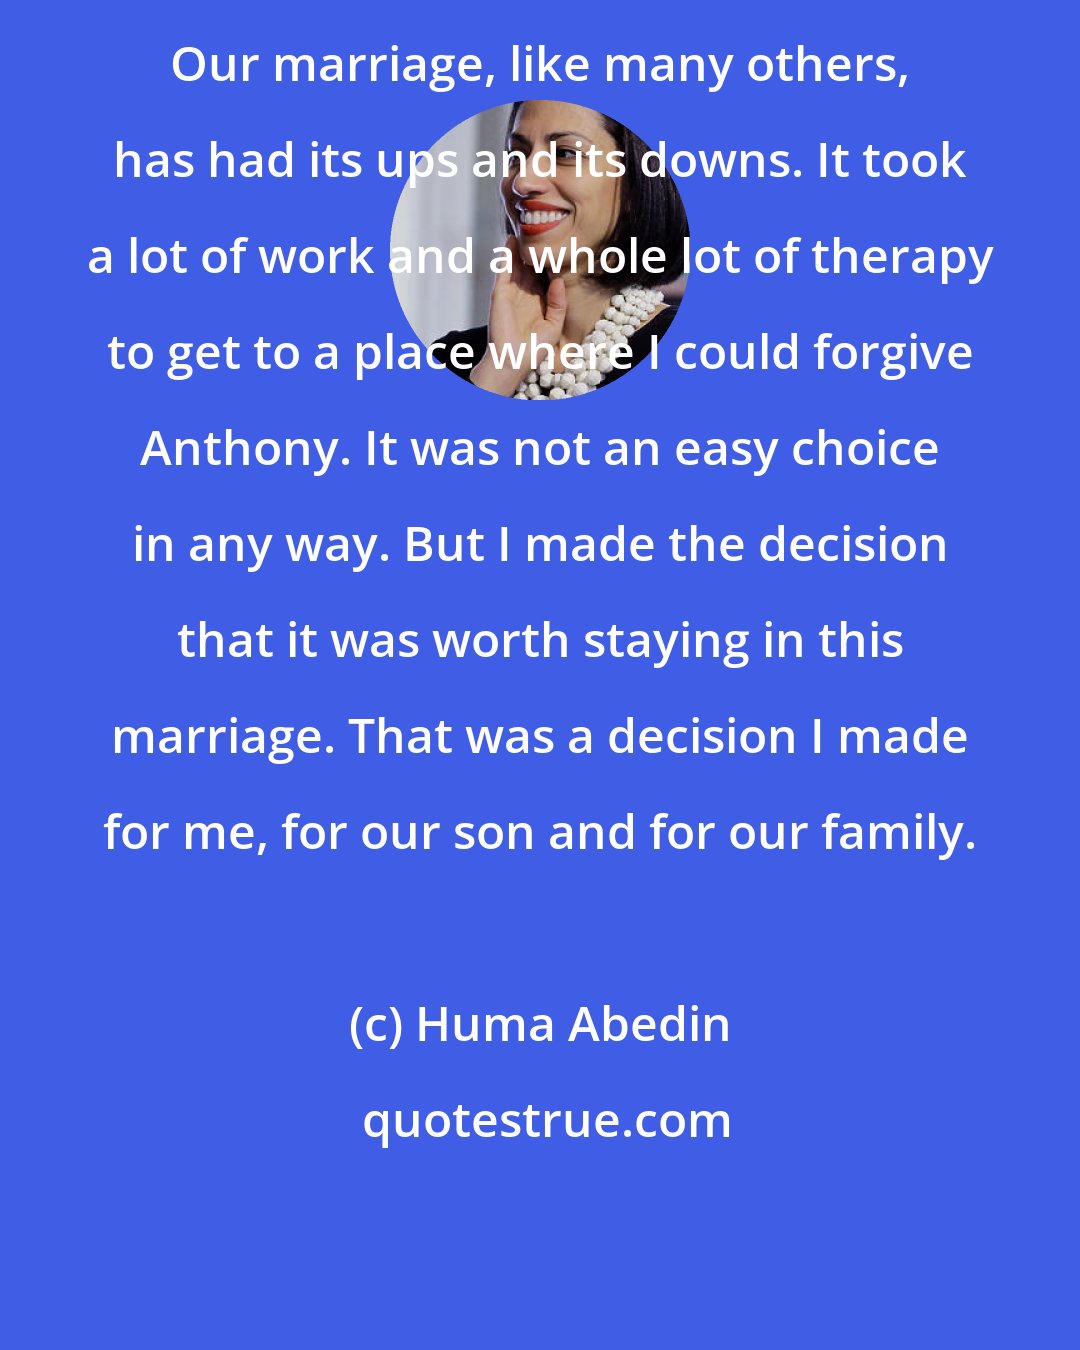 Huma Abedin: Our marriage, like many others, has had its ups and its downs. It took a lot of work and a whole lot of therapy to get to a place where I could forgive Anthony. It was not an easy choice in any way. But I made the decision that it was worth staying in this marriage. That was a decision I made for me, for our son and for our family.